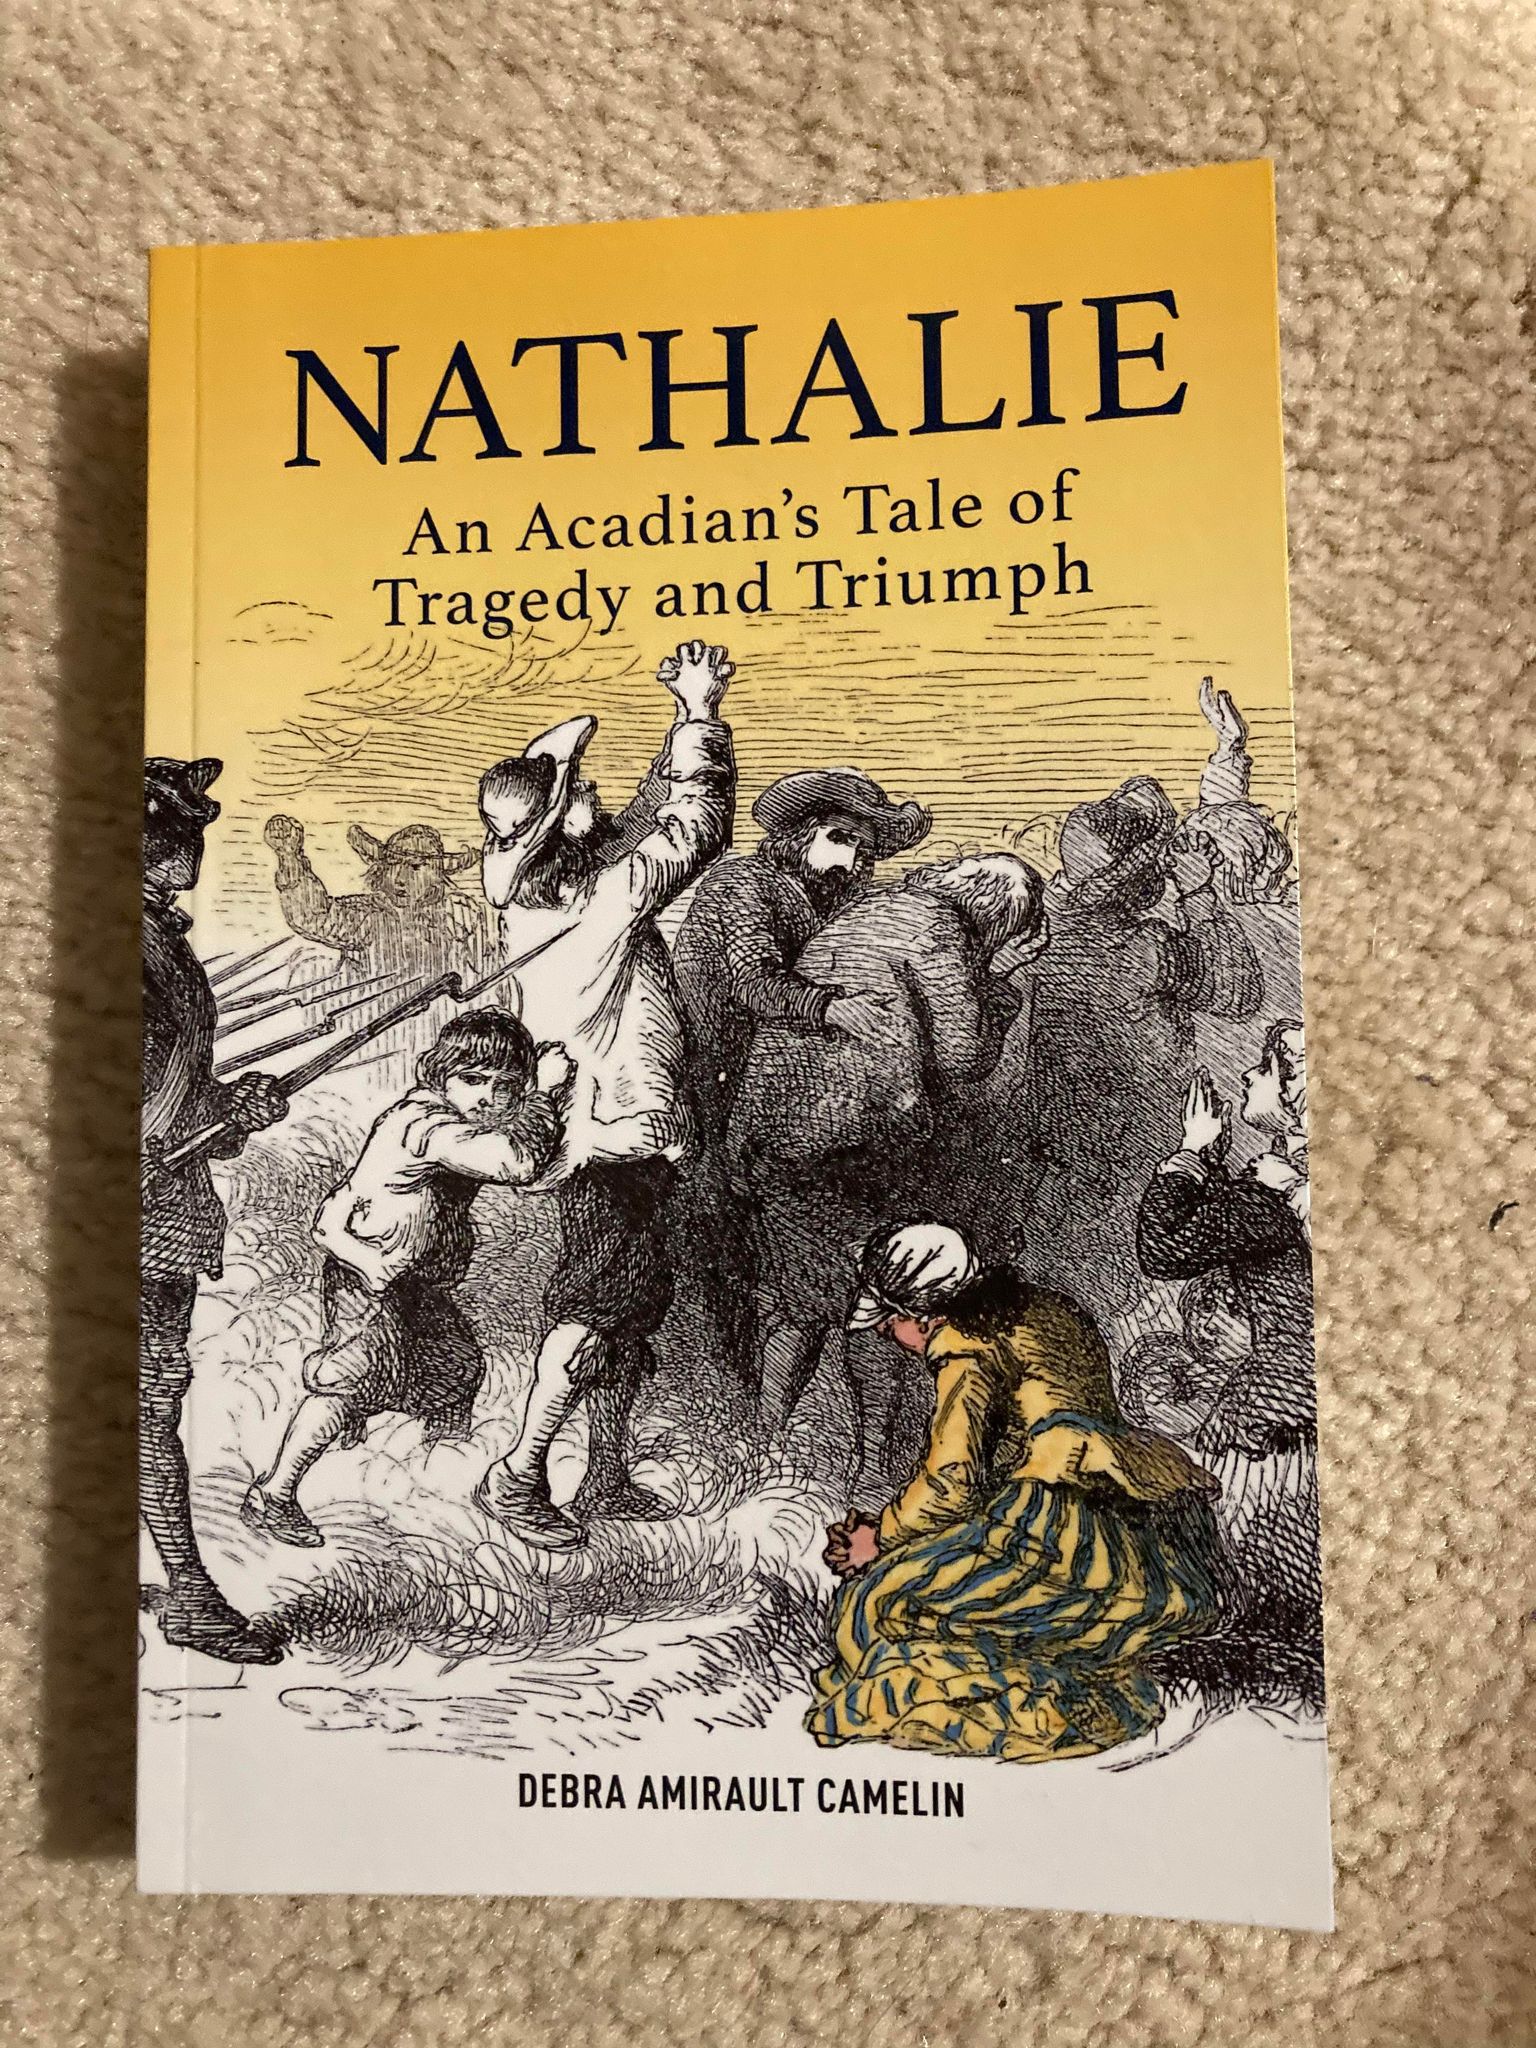 Nathalie – An Acadian’s Tale of Tragedy and Triumph